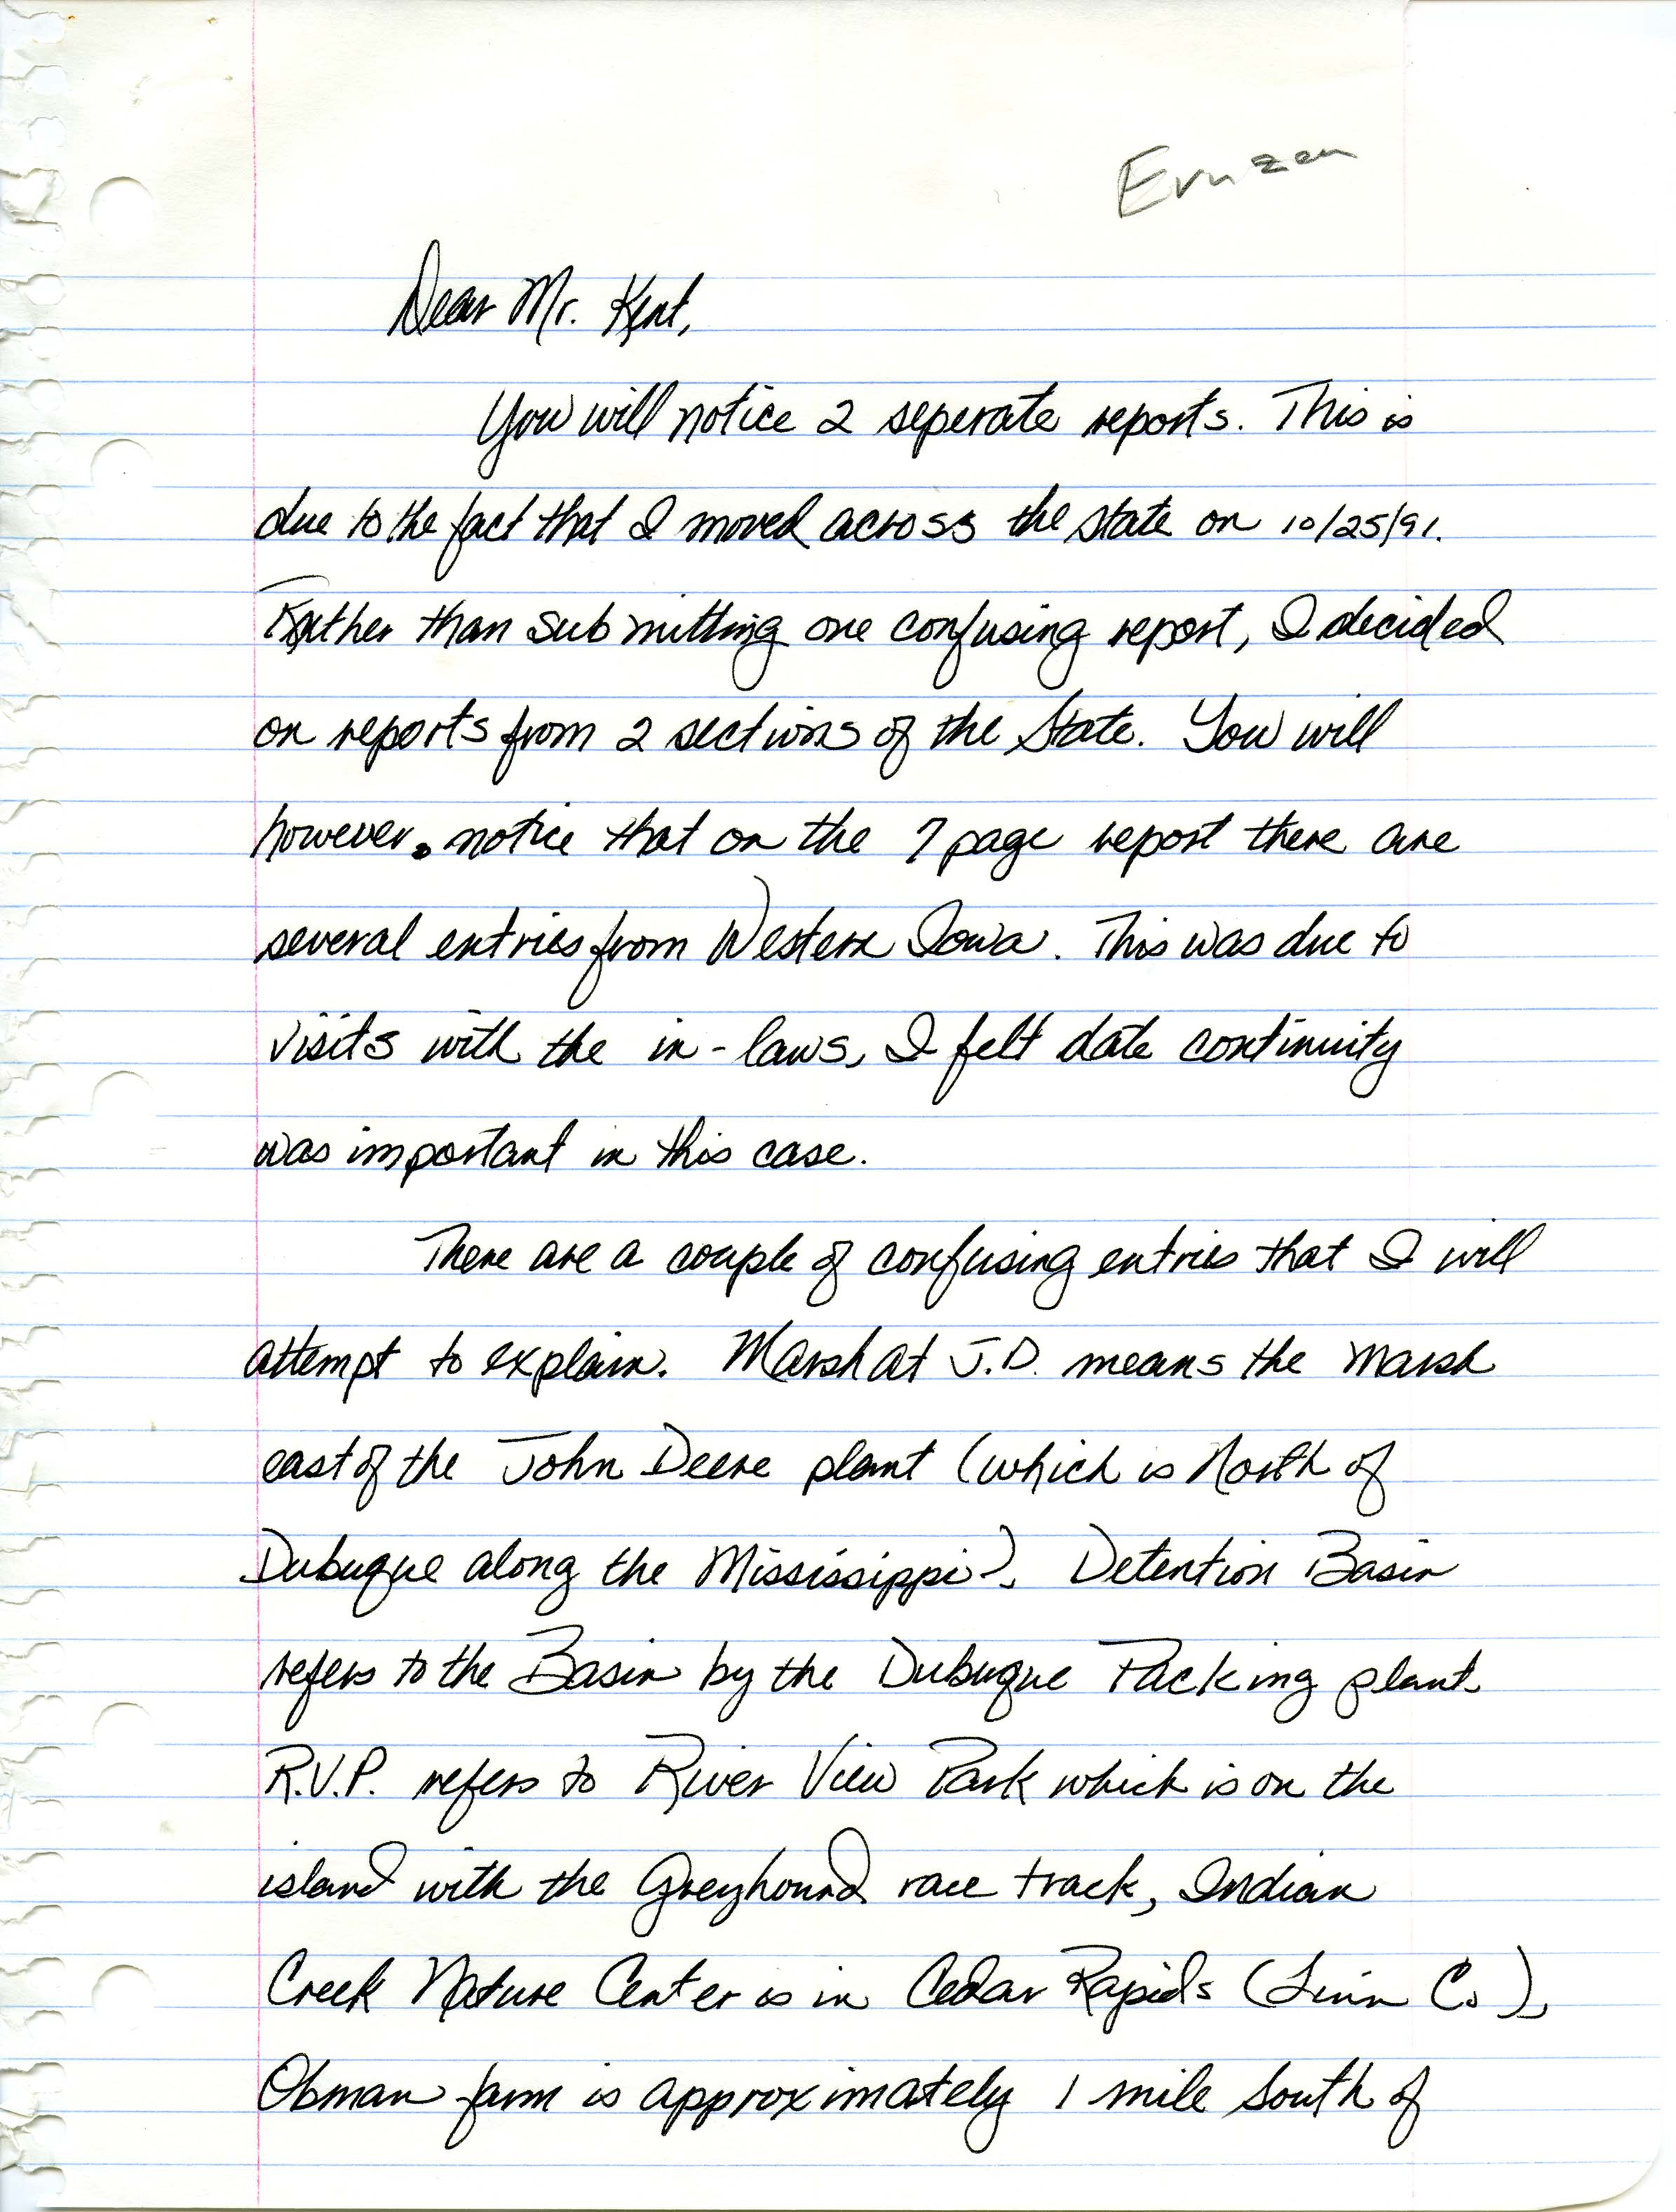 Field notes and Peter Ernzen letter to Thomas H. Kent, fall 1991